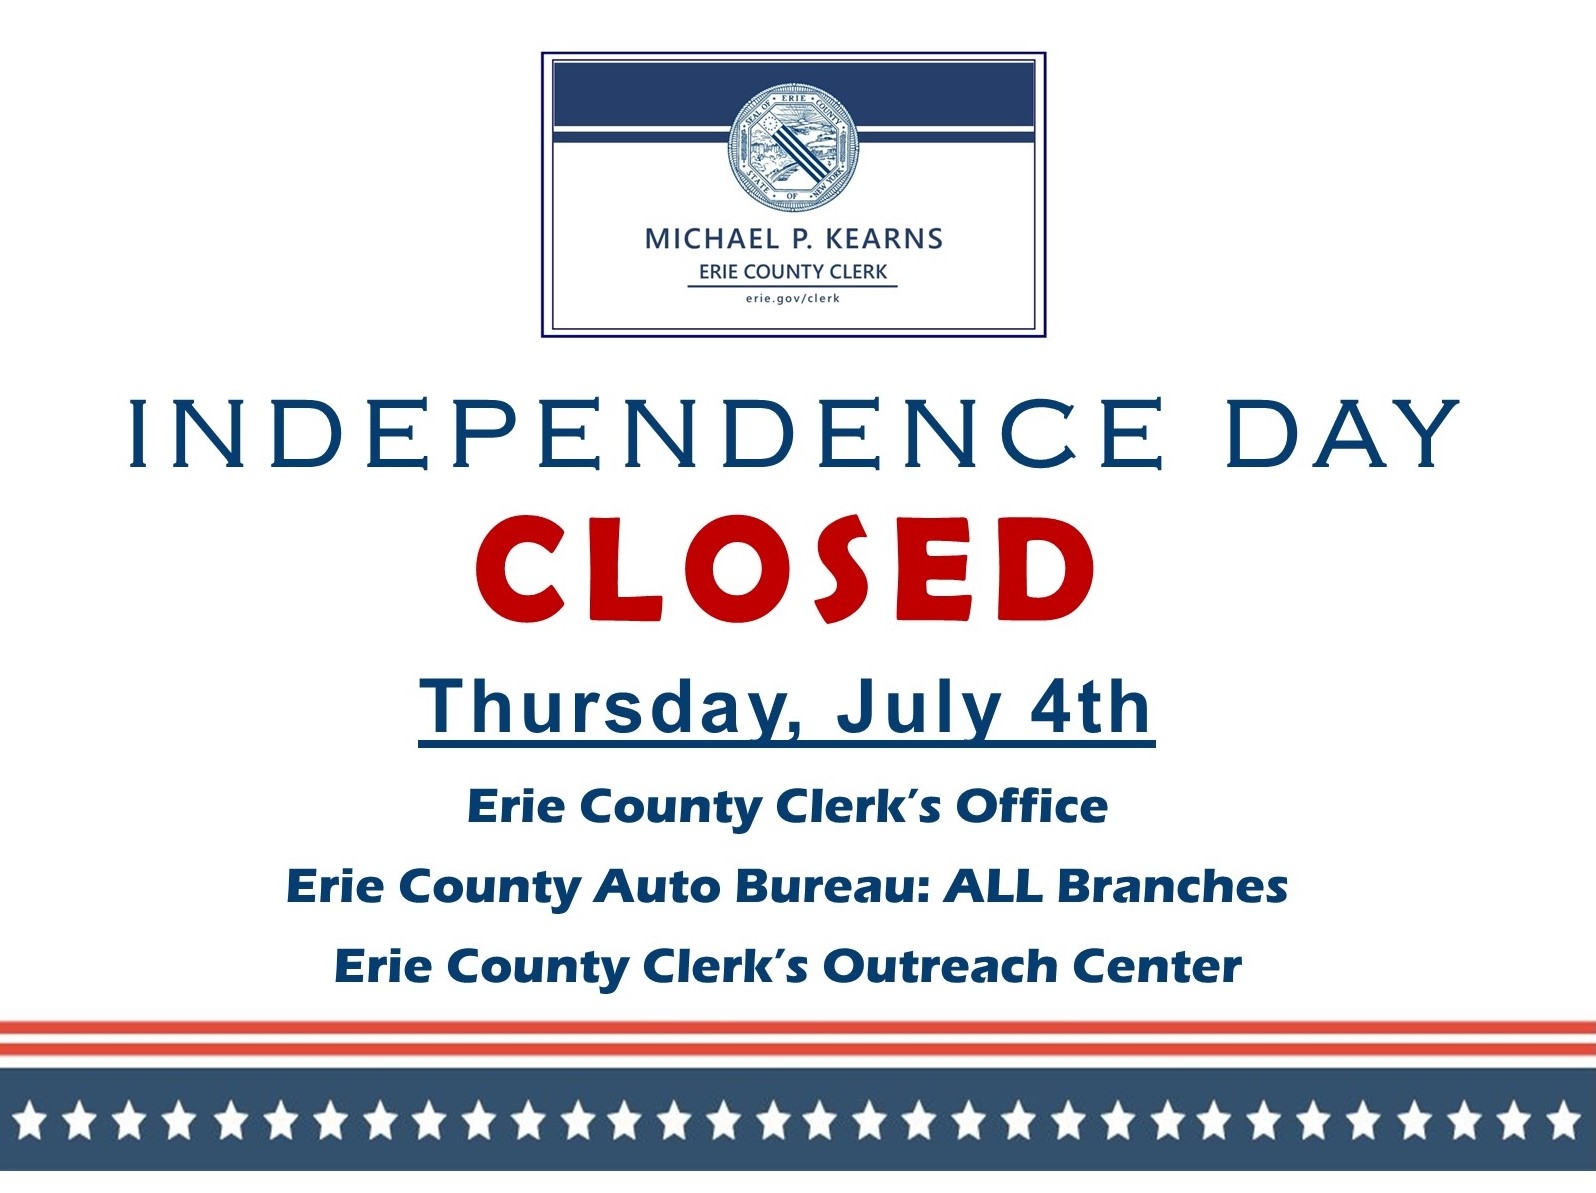 Our Offices will be Closed July 4th